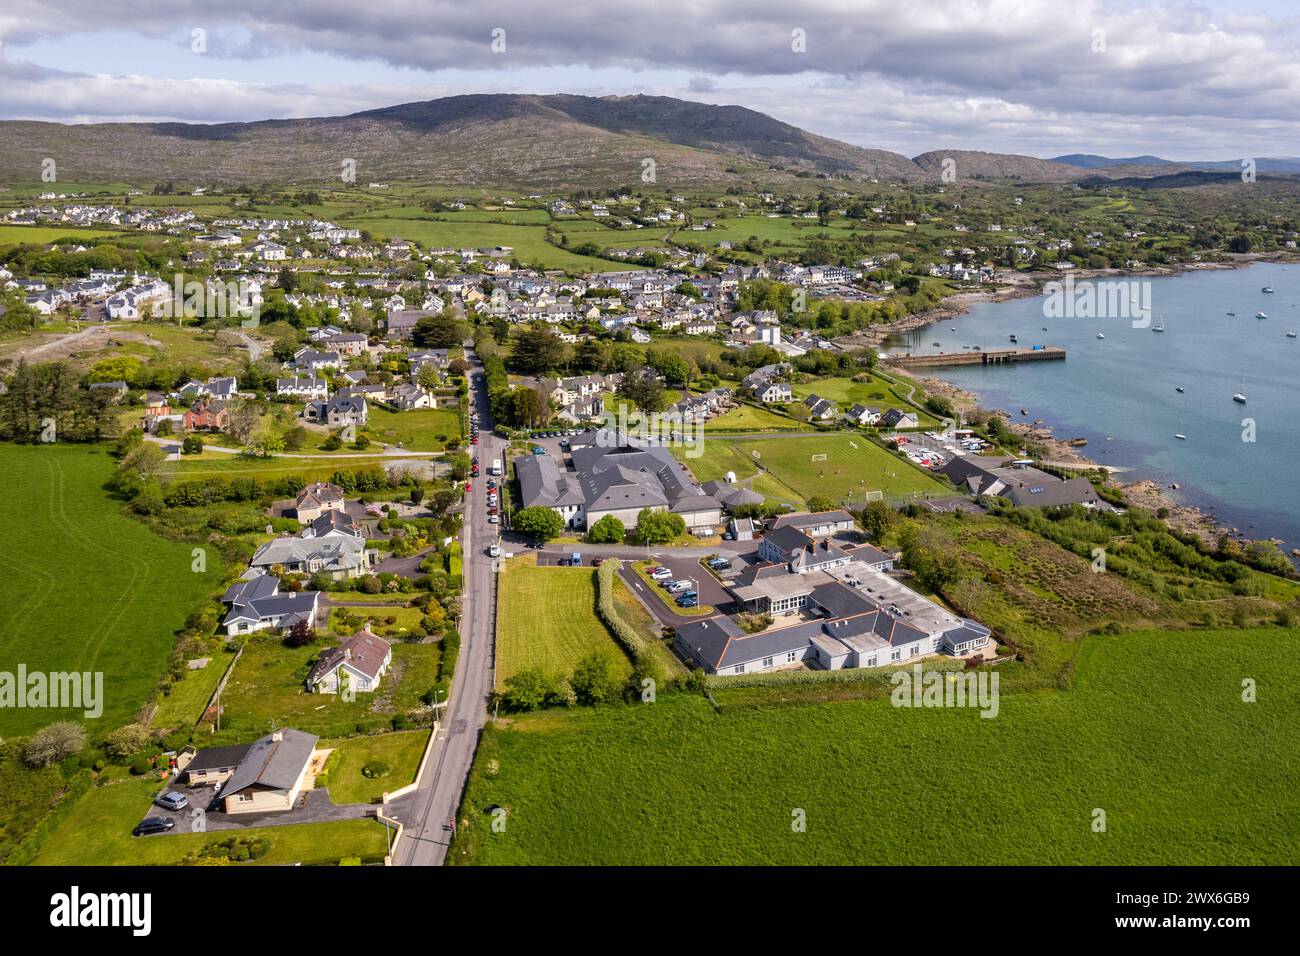 Aerial picture of the seaside village of Schull, West Cork, Ireland with Mount Gabriel in the background. Stock Photo